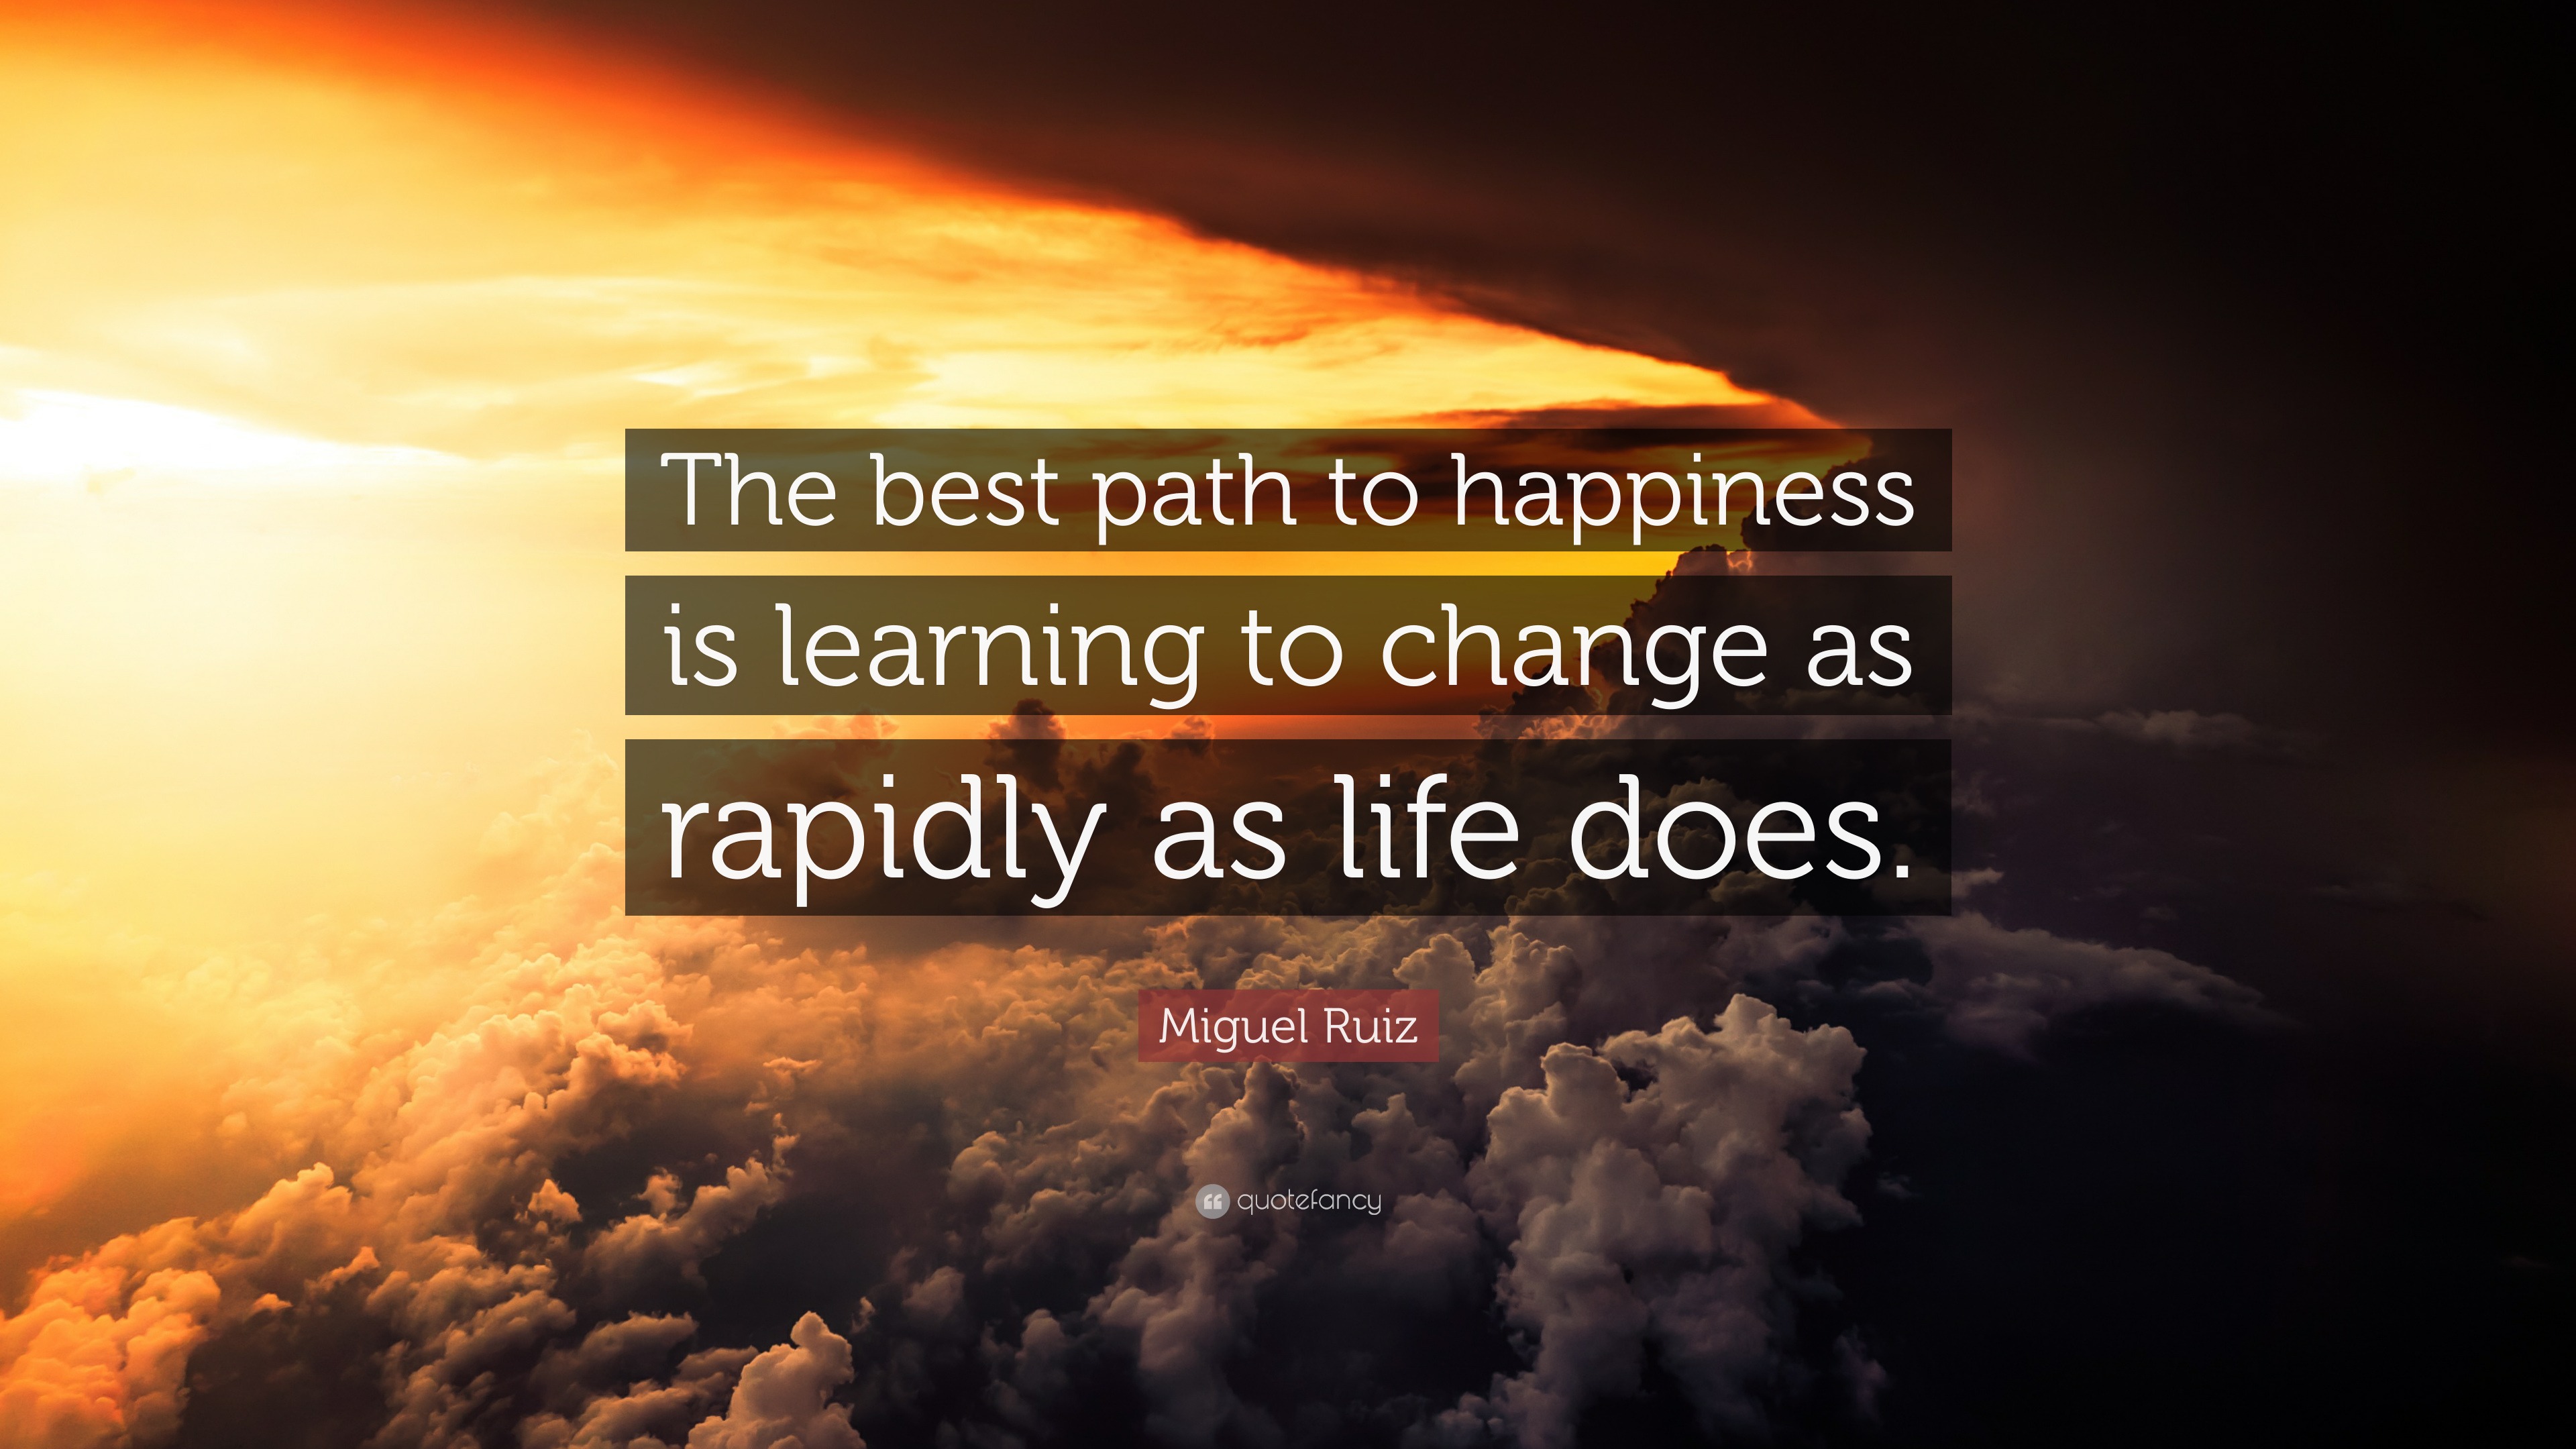 Miguel Ruiz Quote: “The best path to happiness is learning to change as ...